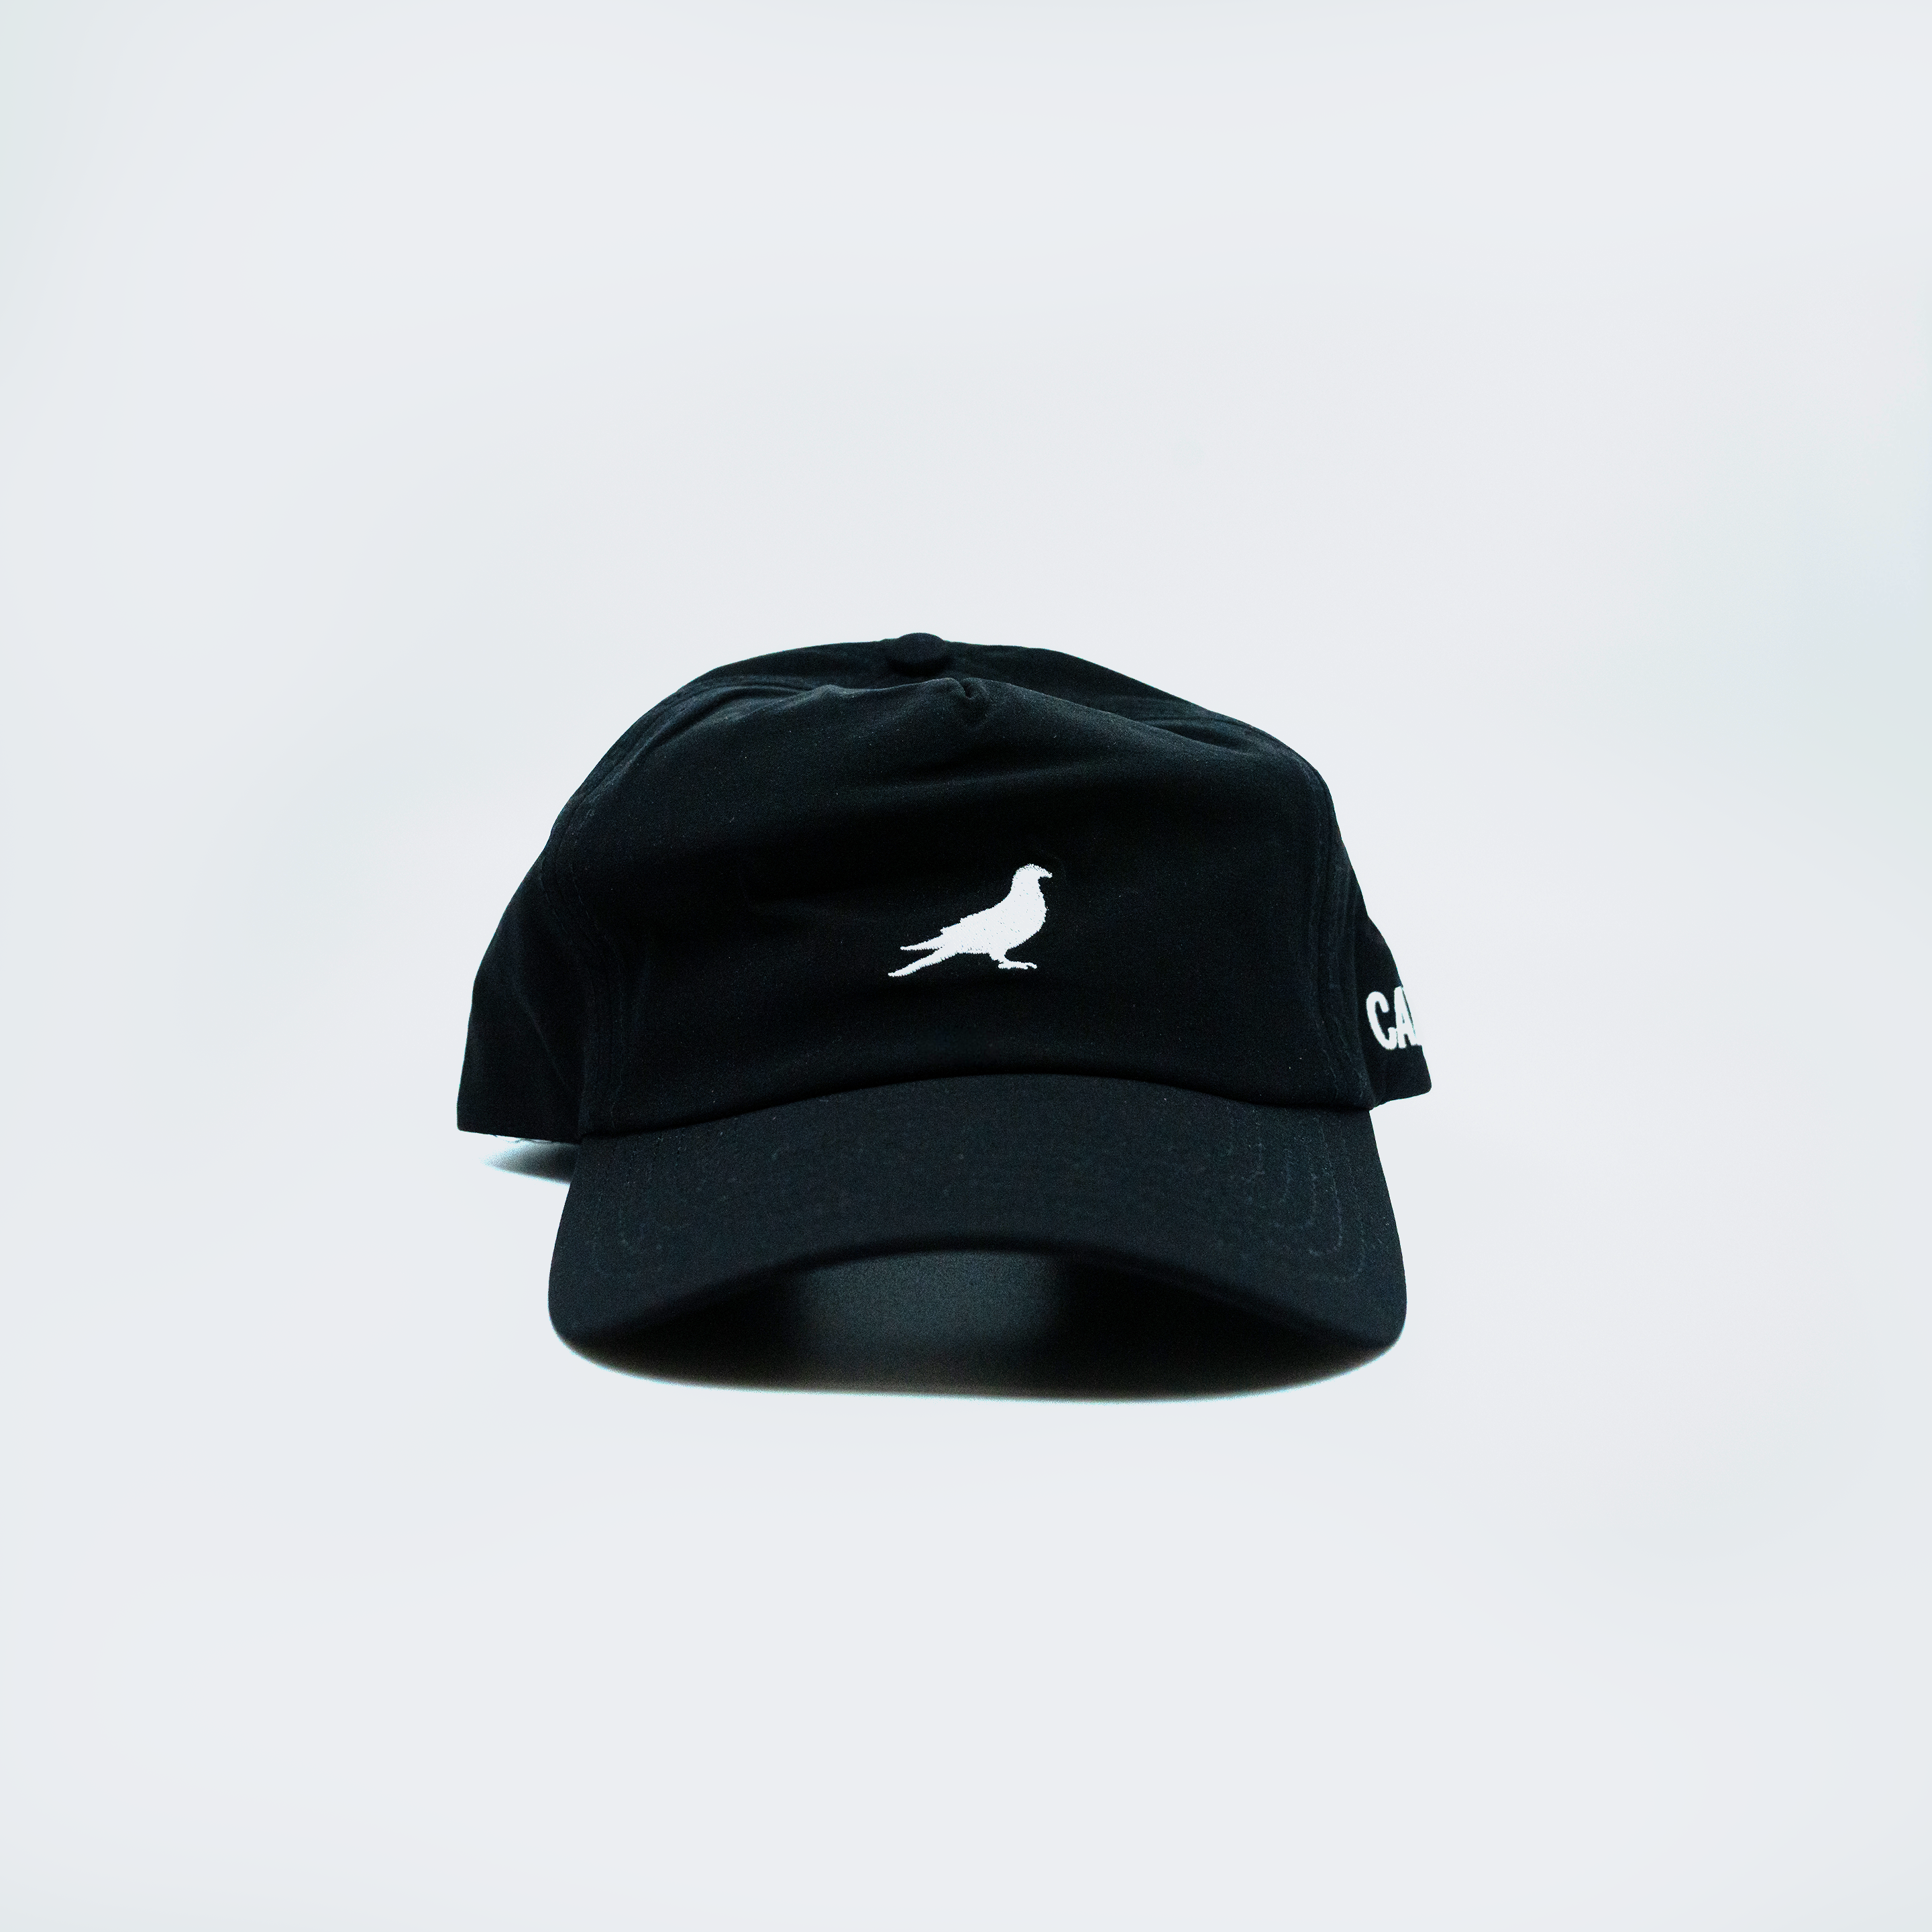 Embroidered Pigeon Hat - Black